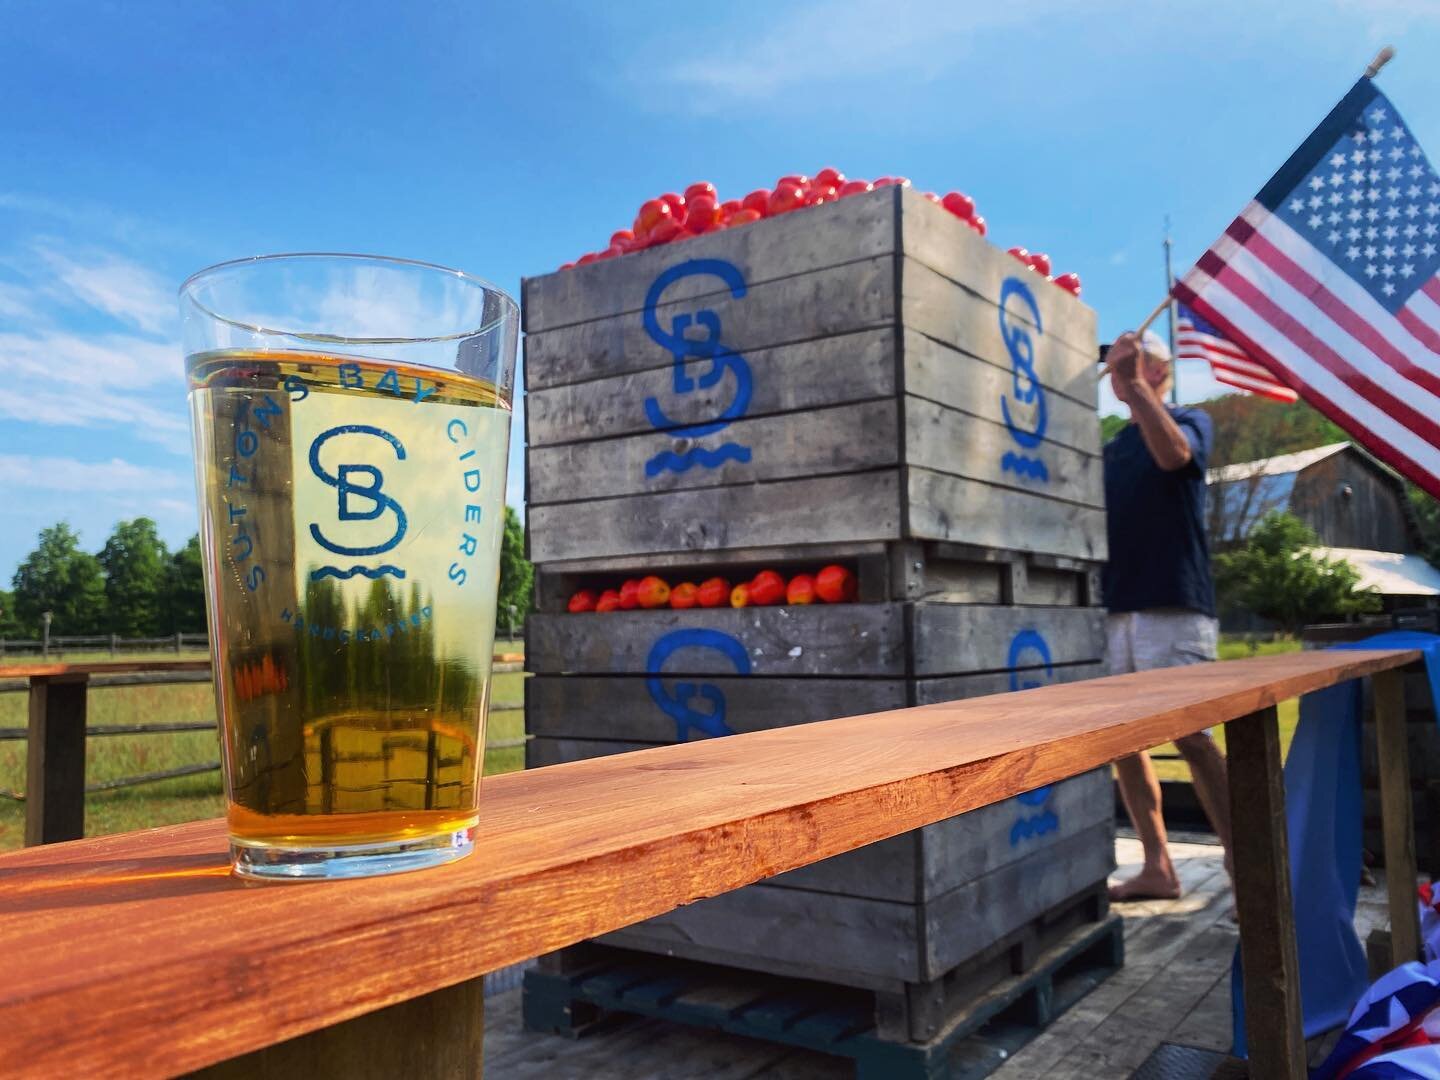 Happy Birthday America! Come see our Suttons Bay Ciders Float today at 3pm in the Leland parade. Have a great 4th of July! #cidery #SuttonsBay #Michigan #UpNorth #HardCider #m22 #Leland #LelandMi #LelandParade #america #CherryFest #cherryfestival #Tr